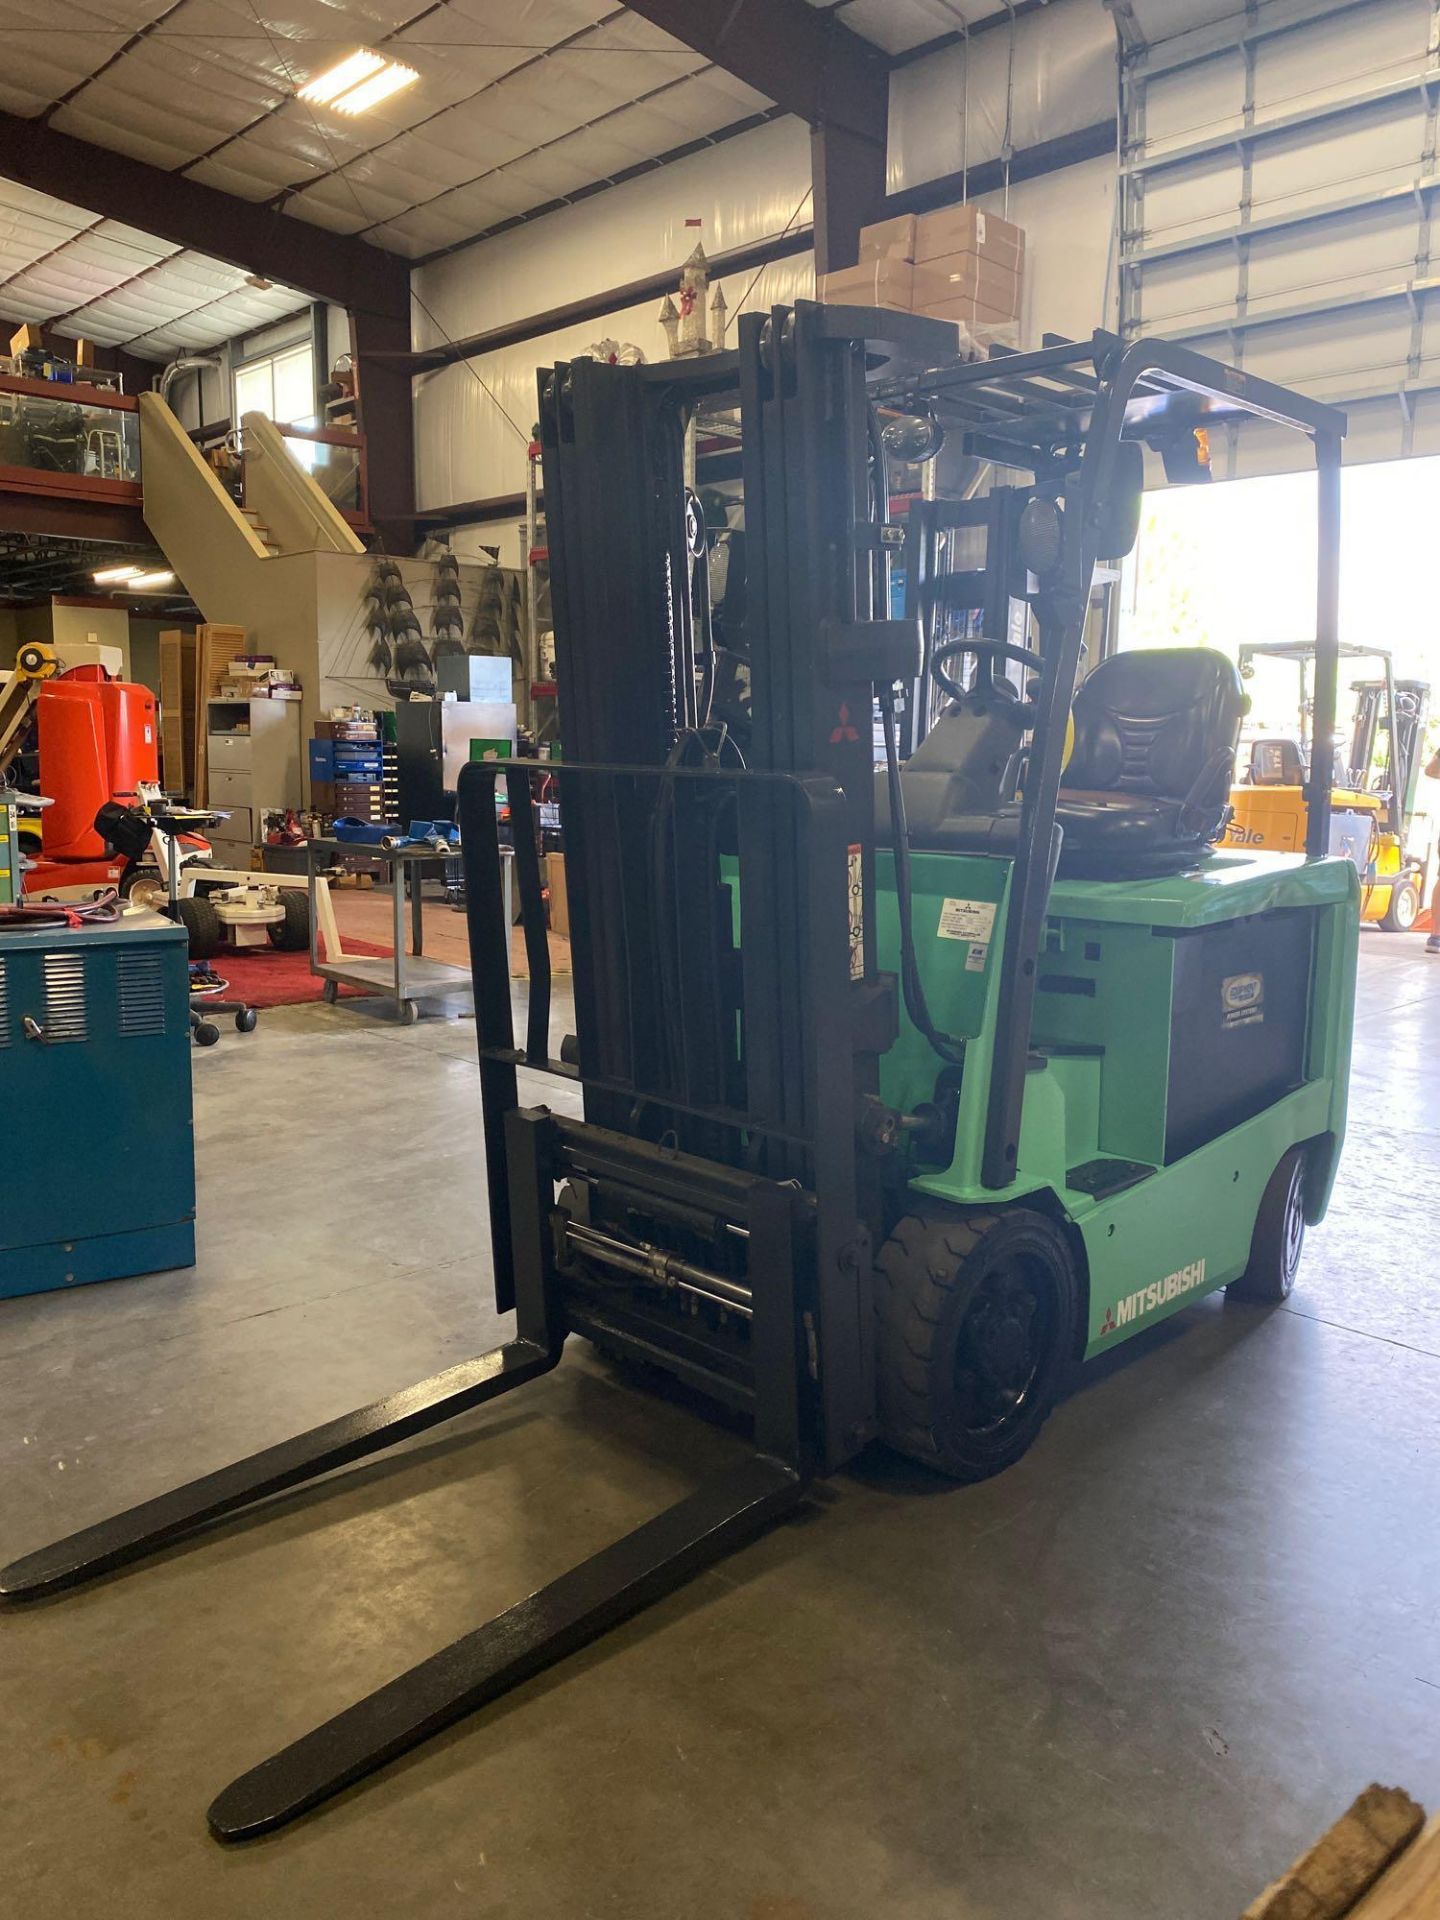 2016 MITSUBISHI FBC25N2 ELECTRIC FORKLIFT, APPROX. 4,500 LB CAPACITY - Image 5 of 7